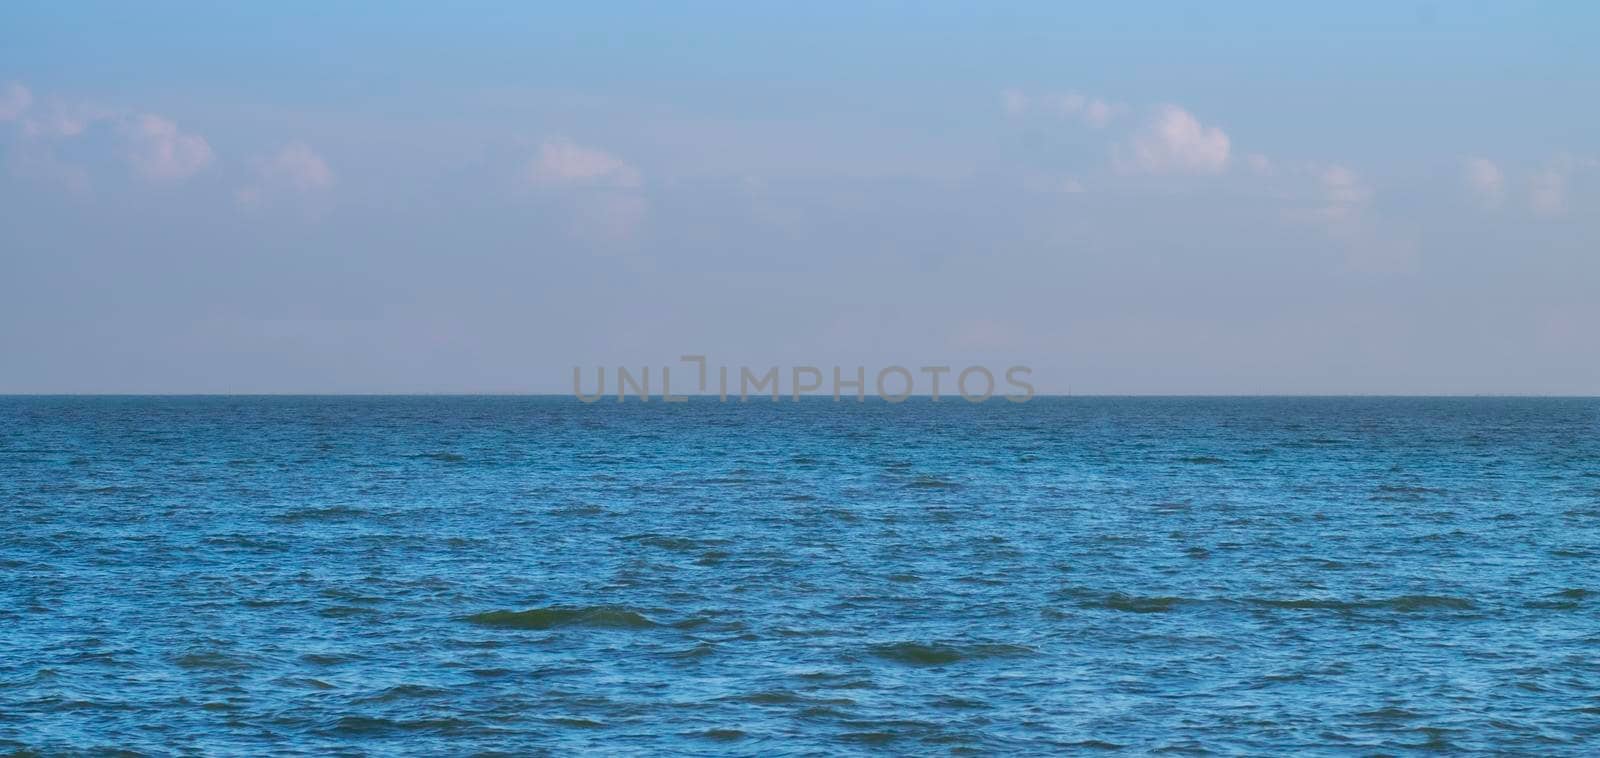 Blue Sea Ocean under blue sky with fluffy white cloud seascape nature background summer travel vacation